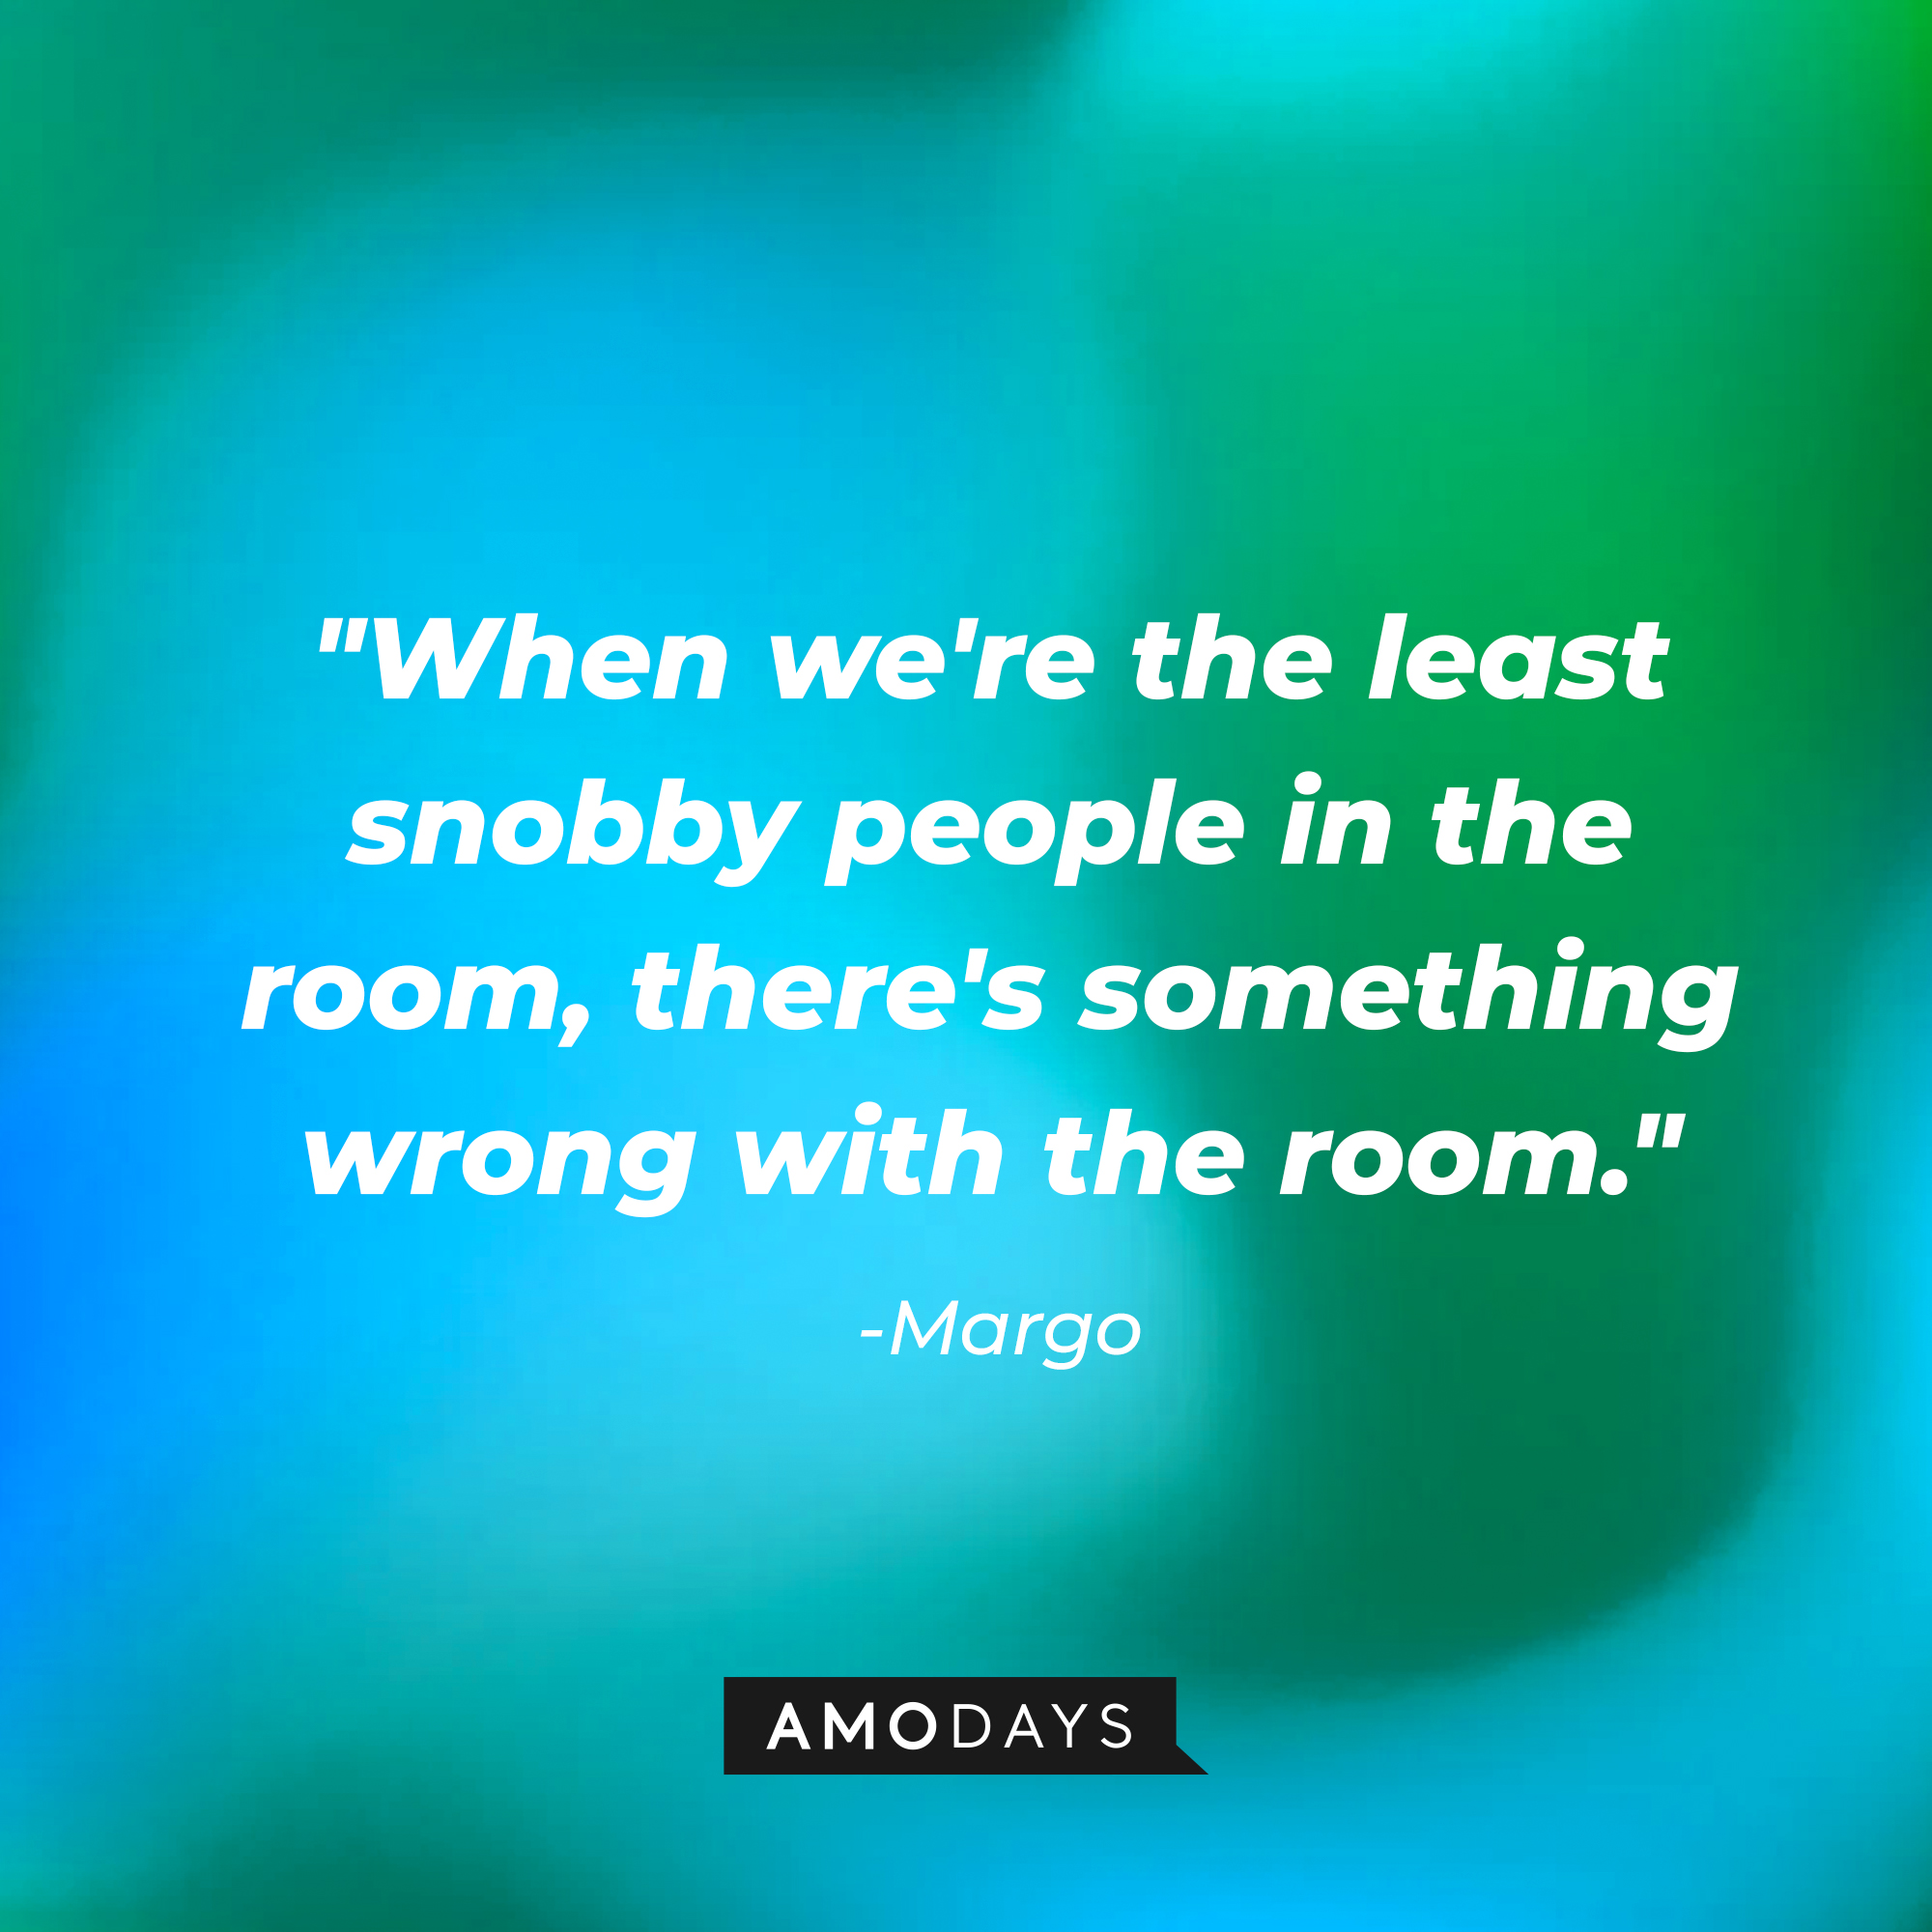 Margo’s quotes: "When we're the least snobby people in the room, there's something wrong with the room." | Source: AmoDays